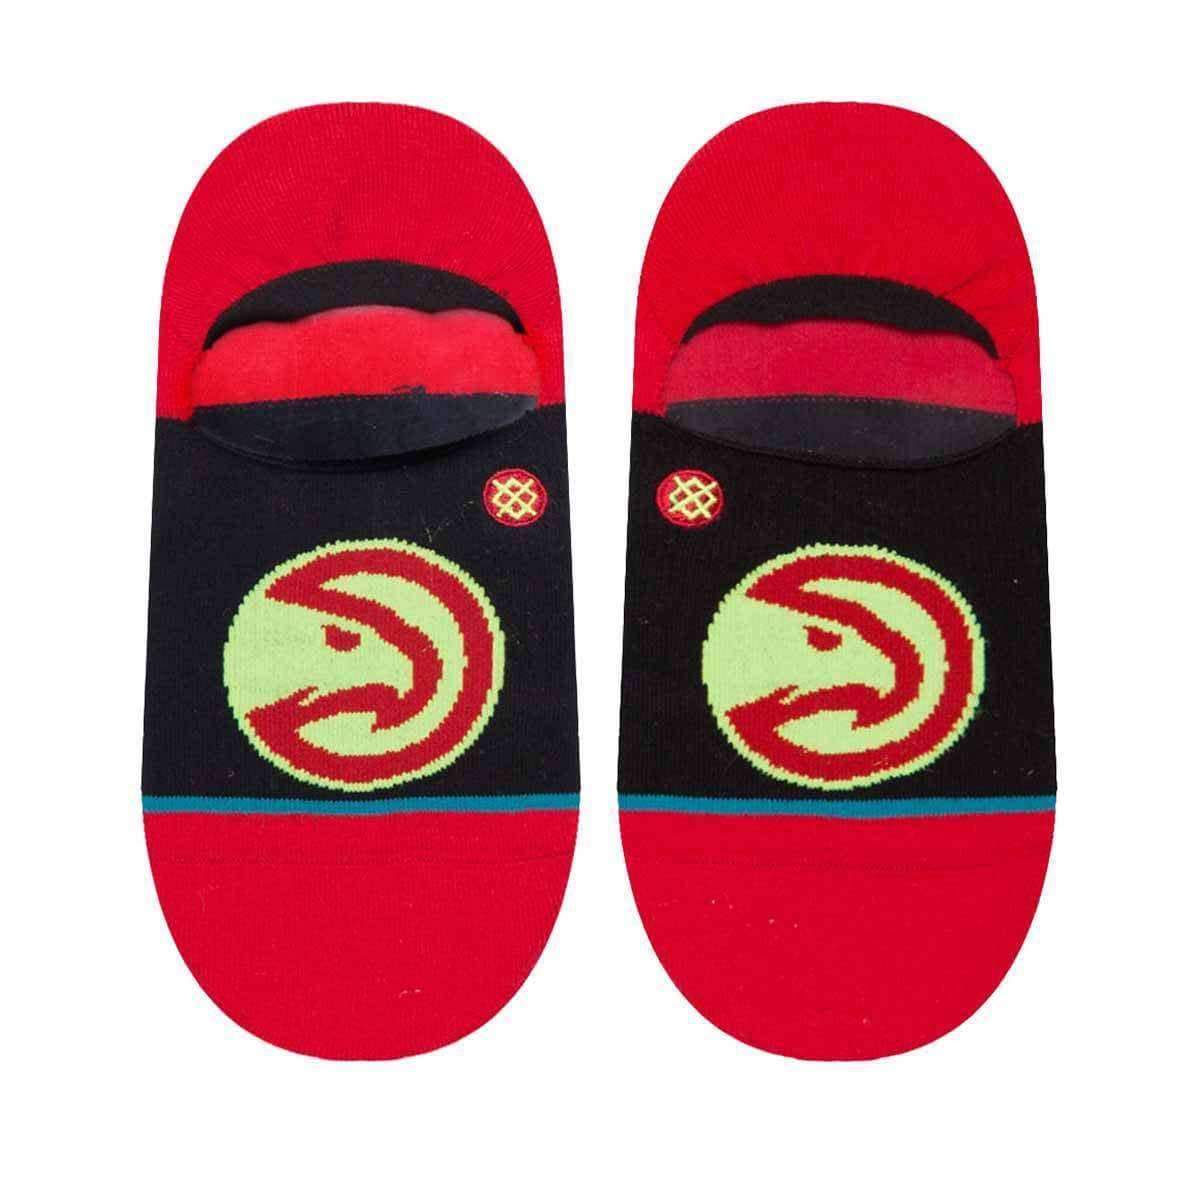 Stance NBA Arena Hawks Invisible Low Socks in Orange Mens Low/Ankle Socks by Stance